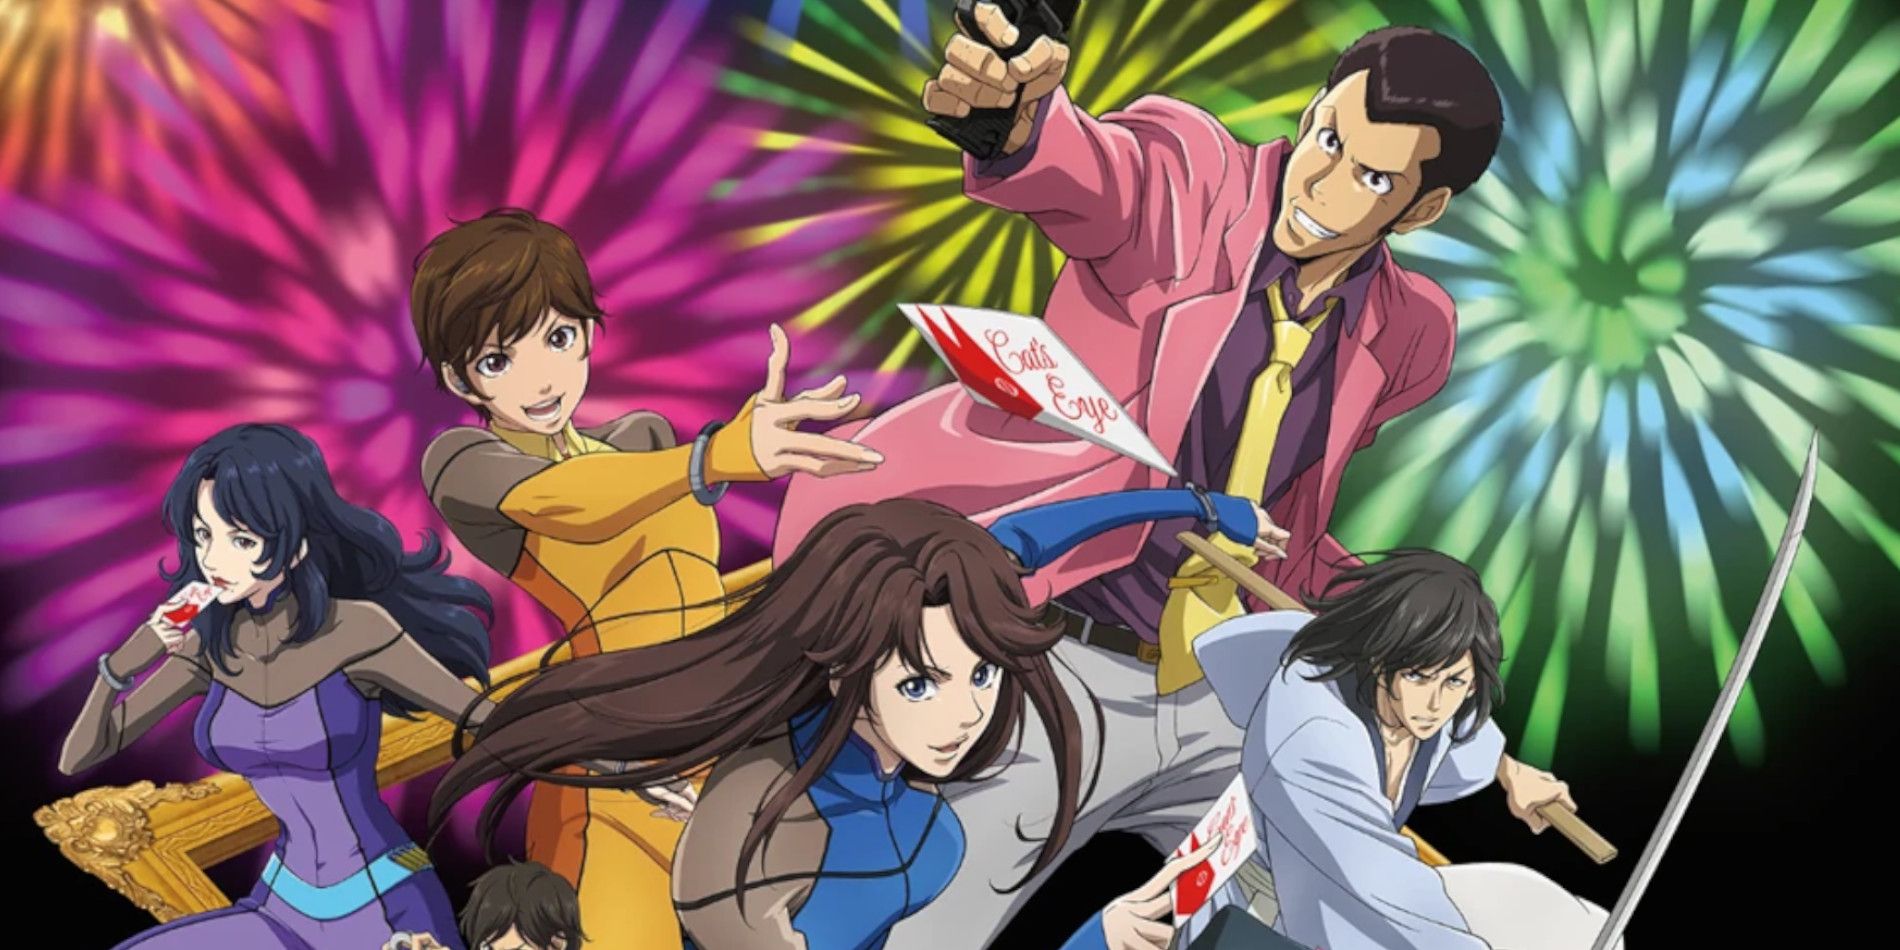 How Lupin III Fans Can Get Started With the Original Cat's Eye Anime